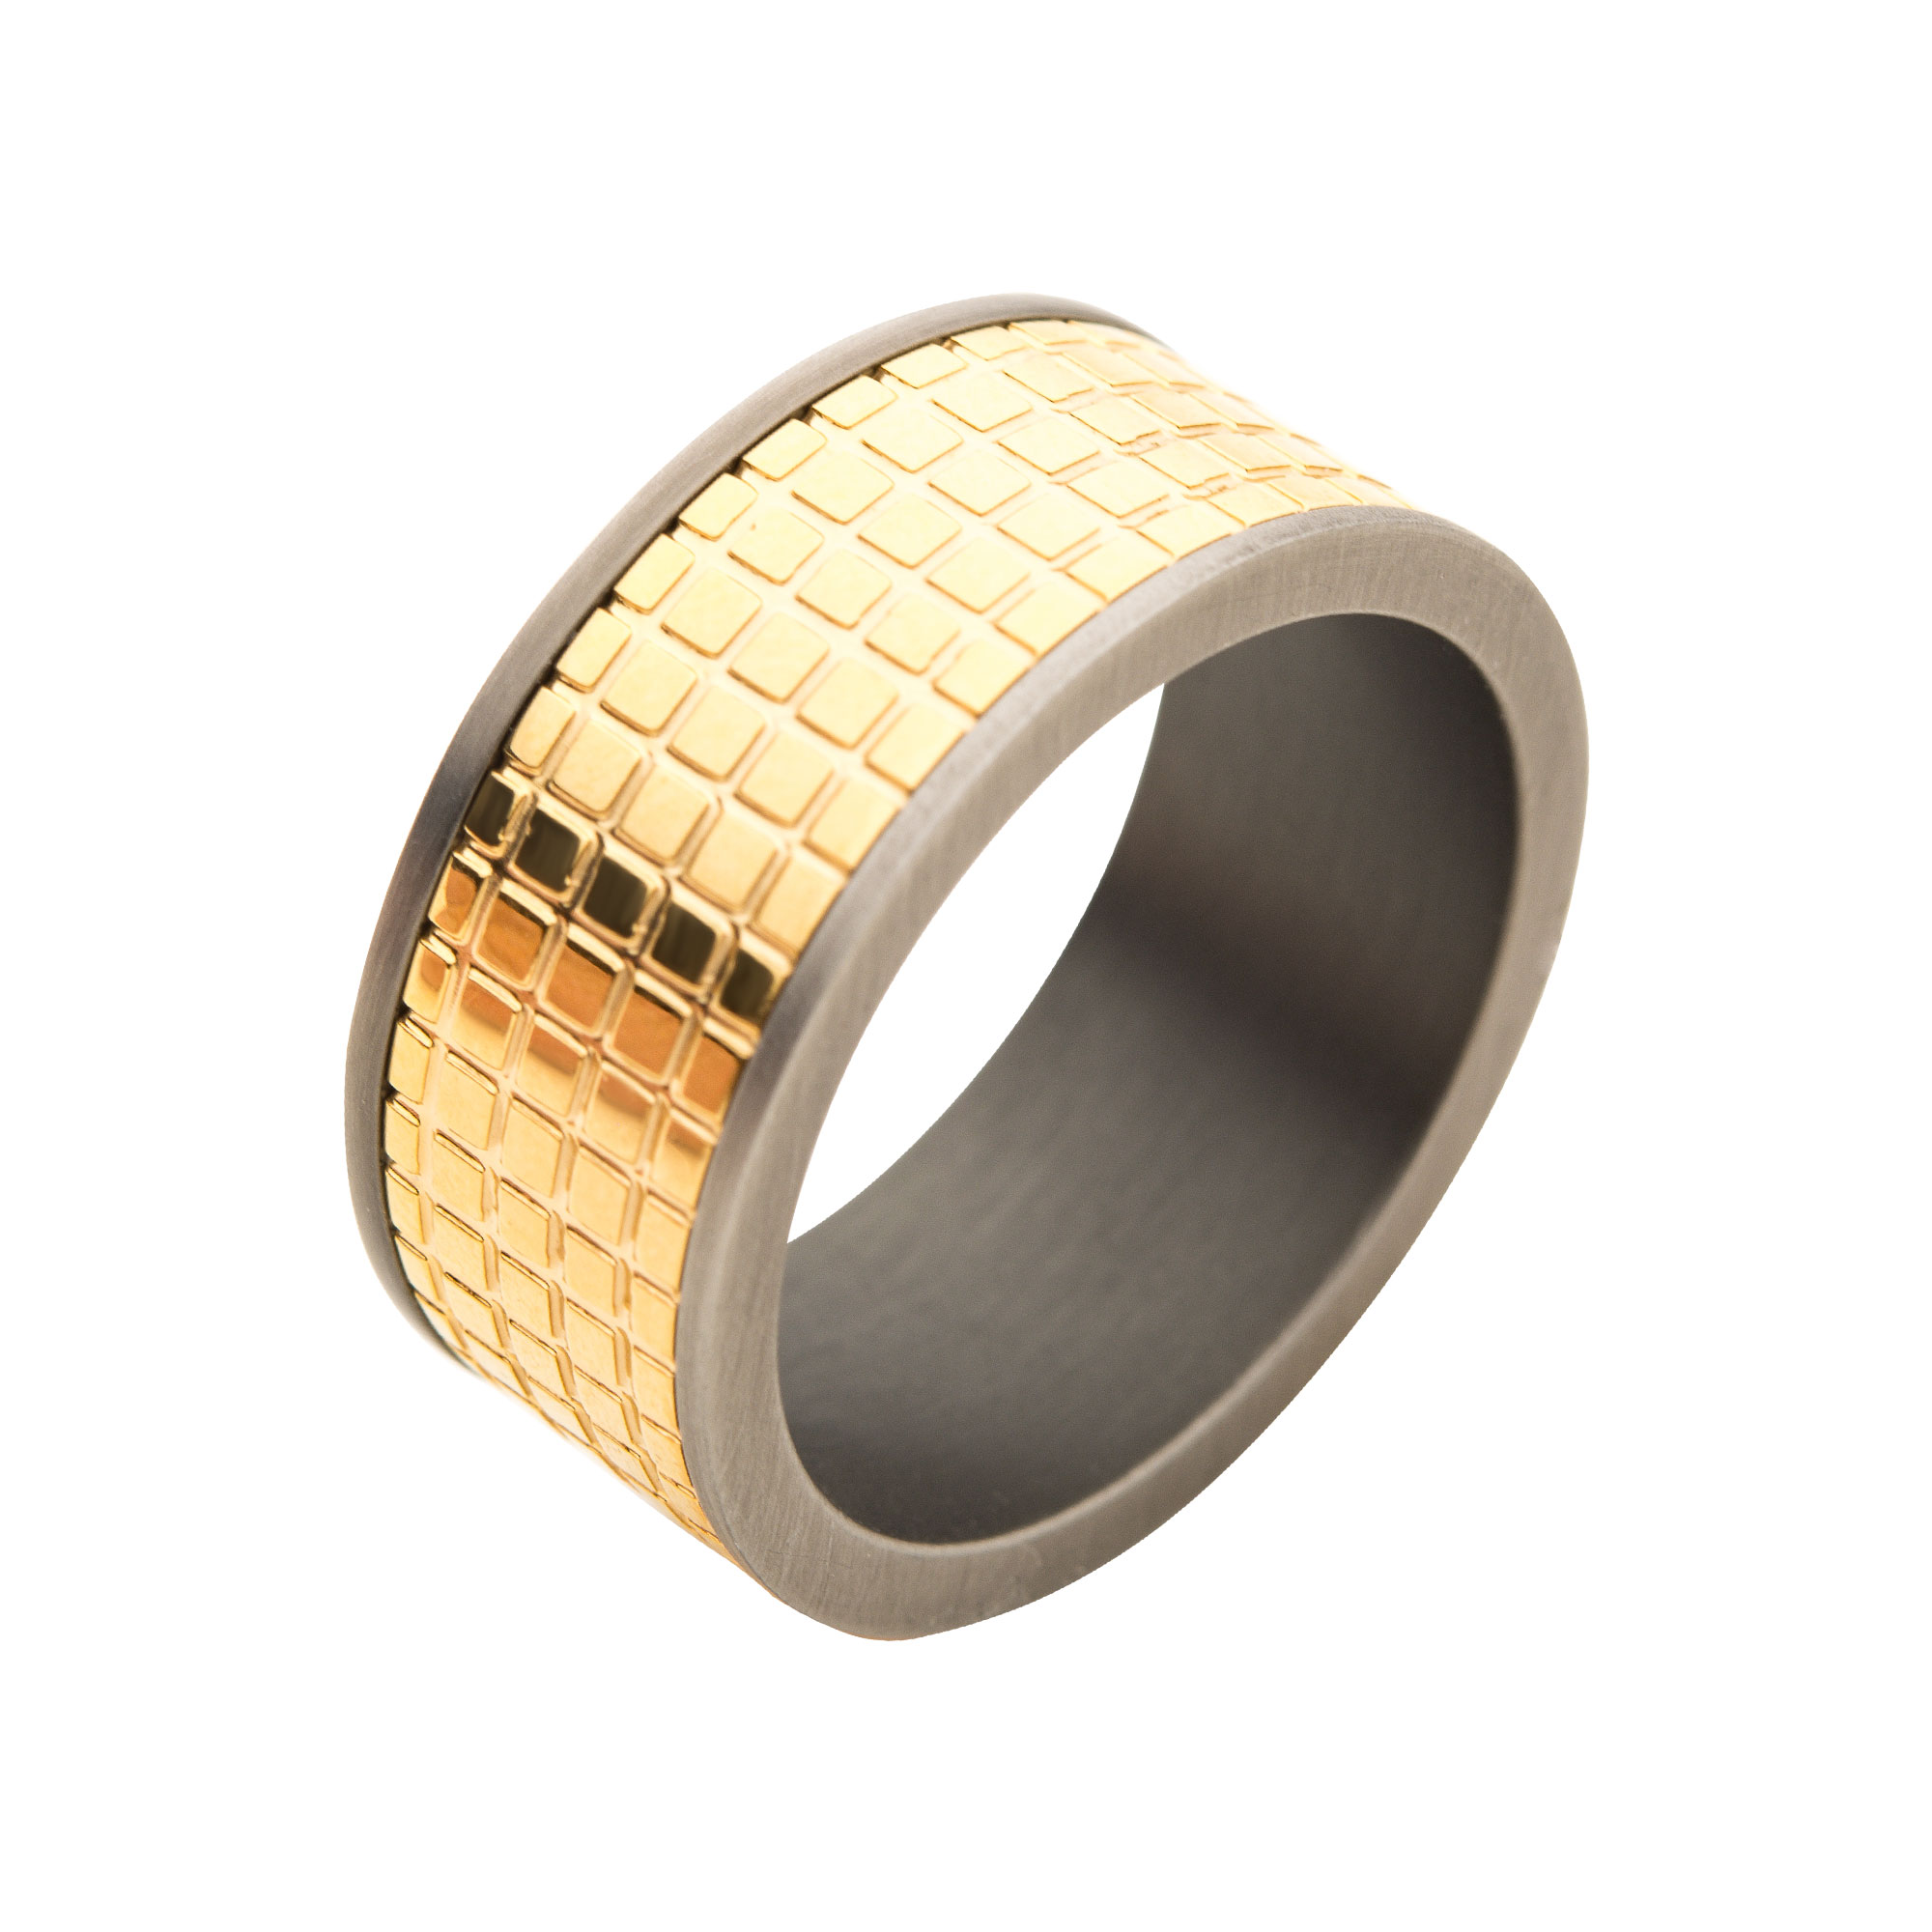 Gun Metal Plated with 18K Gold Plated Grid Inlay Ring K. Martin Jeweler Dodge City, KS